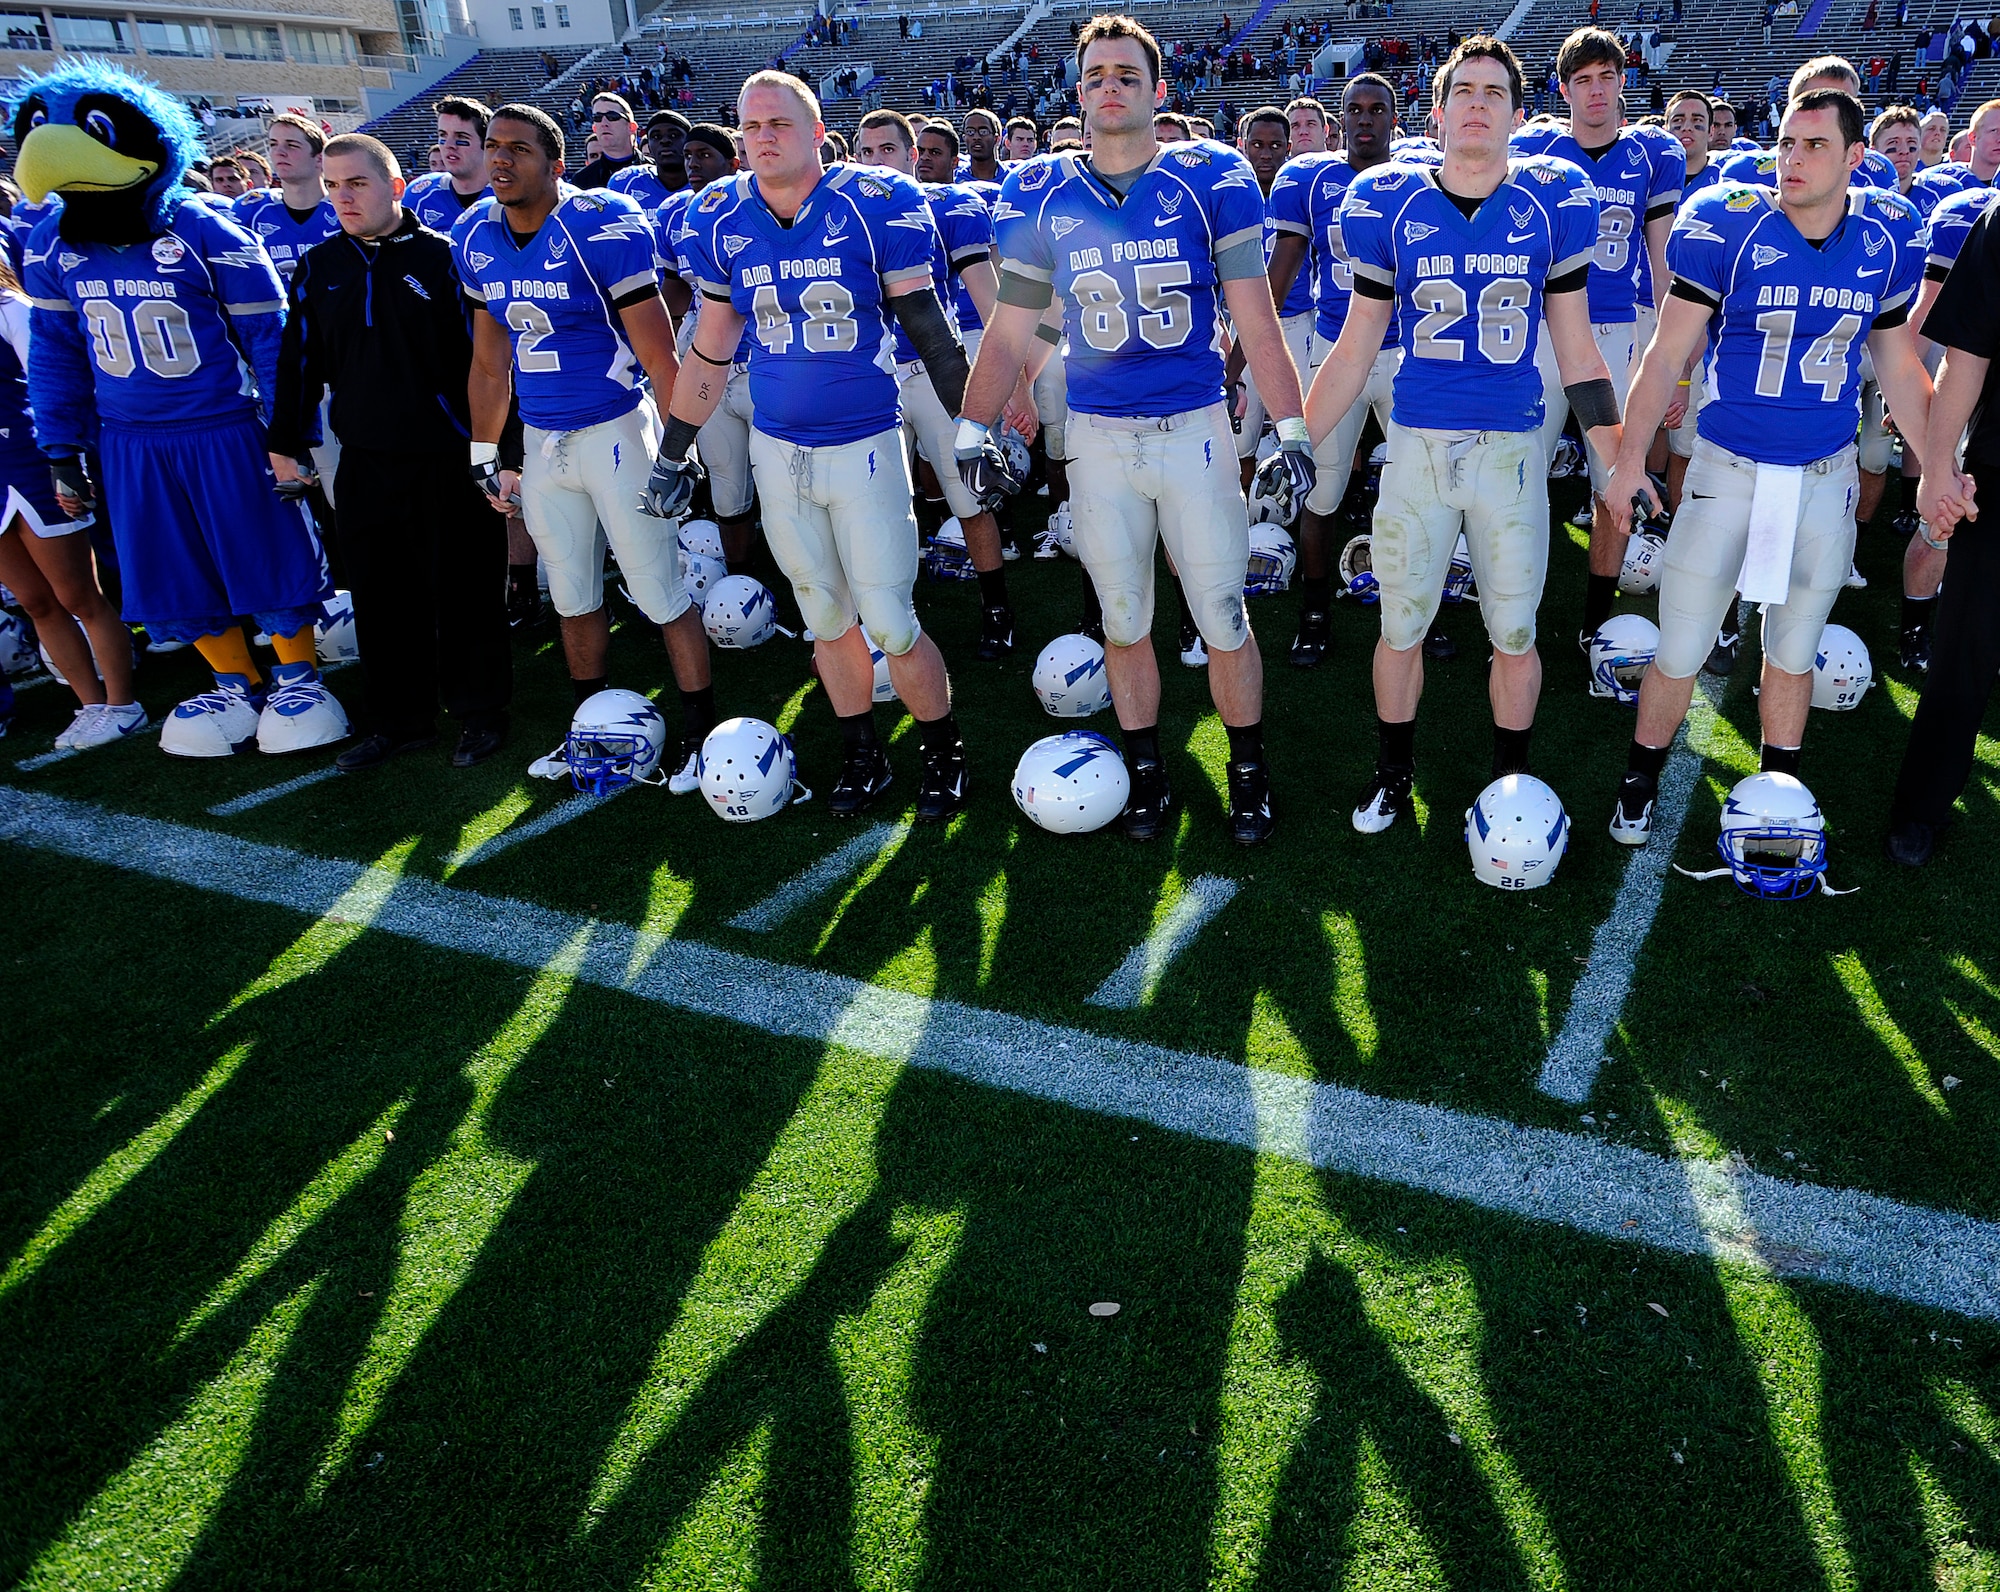 U.S. Air Force Academy football players stand together in honoring alumni and fans at the conclusion of the Bell Helicopter Armed Forces Bowl game between the U.S. Air Force Academy and the University of Houston Dec. 31 in Fort Worth, Texas. Air Force lost to Houston, 34-28. (U.S. Air Force photo/Staff Sgt. Bennie J. Davis III)